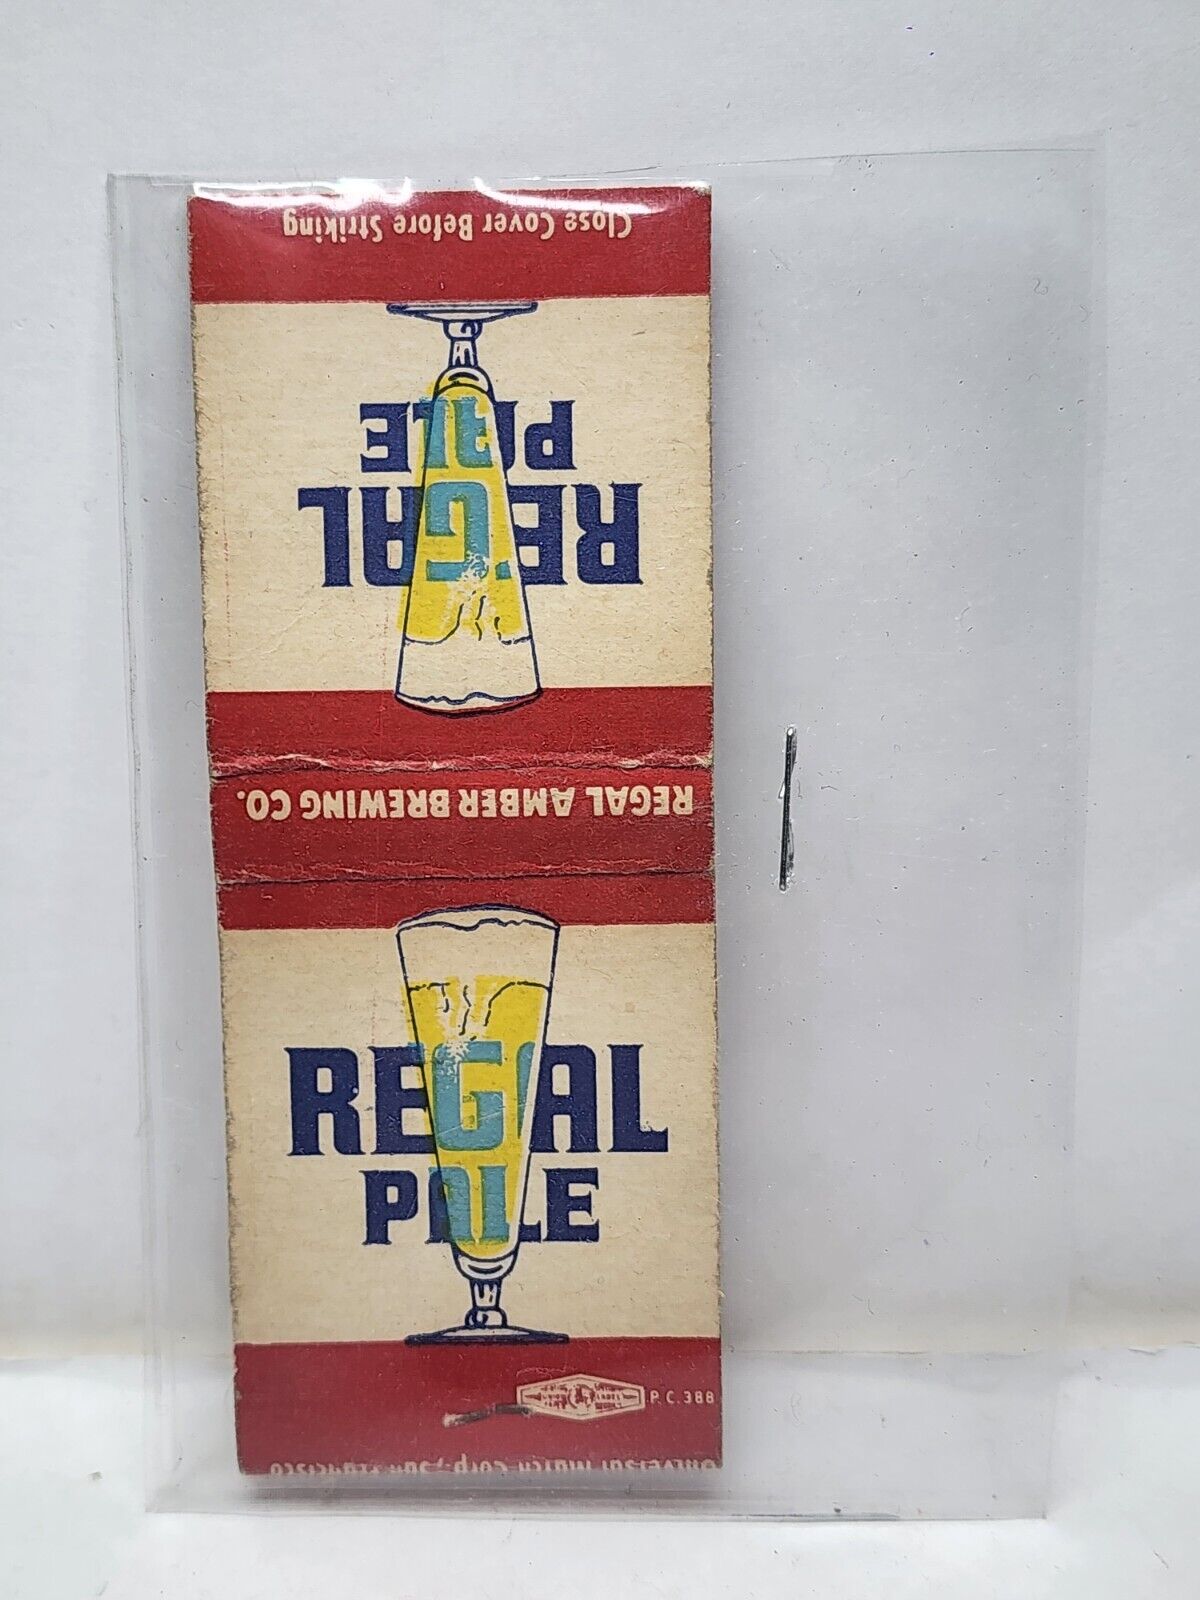 Vintage Matchbook Cover - REGAL PALE Amber Brewing Co. Beer Ale Alcohol Drinks